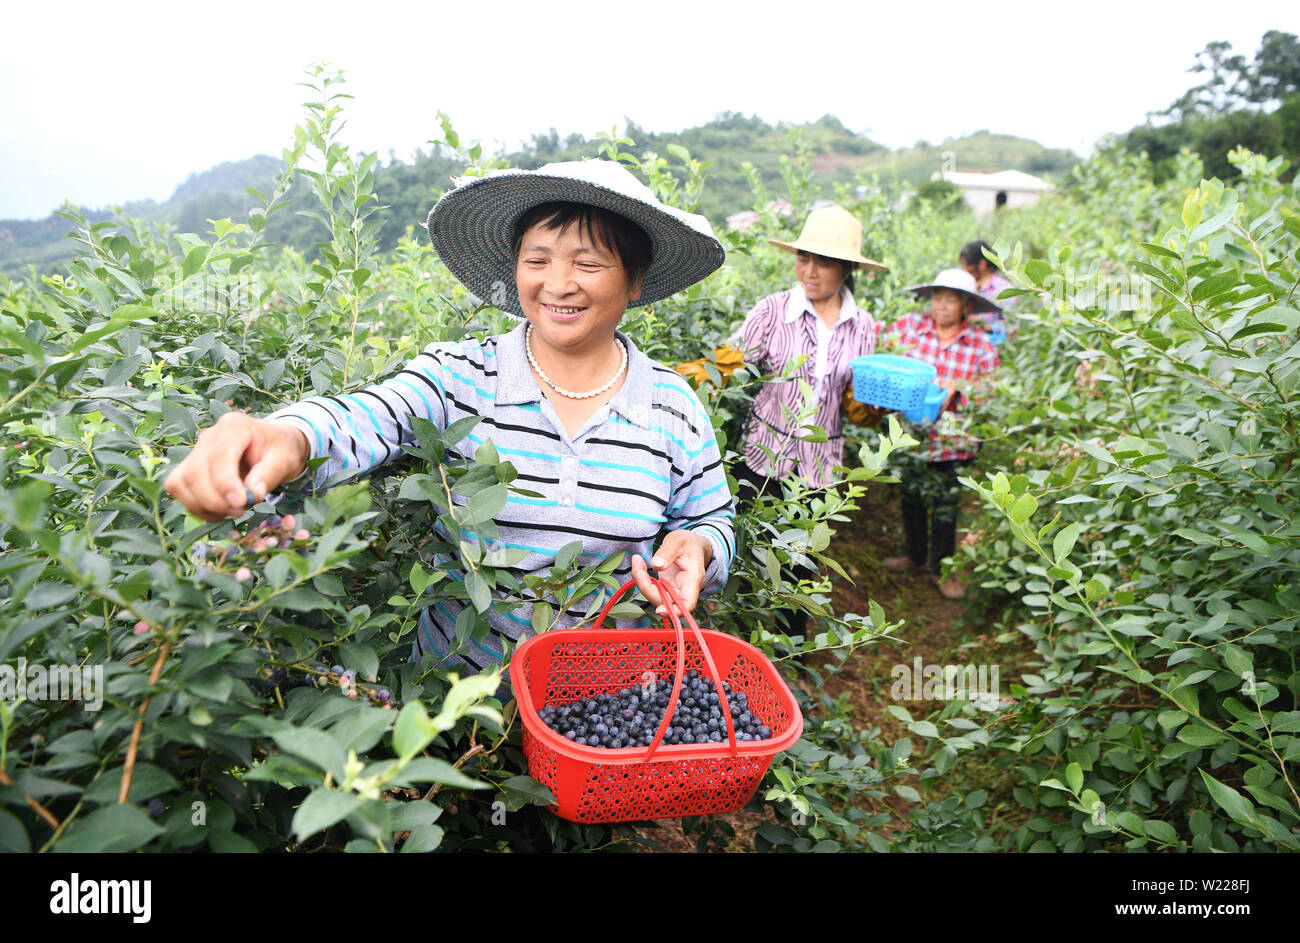 Chongqing, China's Chongqing Municipality. 5th July, 2019. Villagers pick blueberries at a blueberry planting base at Damianpo Village of Cizhu Town in Yubei District, southwest China's Chongqing Municipality, July 5, 2019. The town's over 1,600 mu (about 107 hectares) alpine blueberry enters its optimal picking period. Depending on its natural advantages, Cizhu town has encouraged developing alpine blueberry industry as a way to improve local people's income. Credit: Wang Quanchao/Xinhua/Alamy Live News Stock Photo